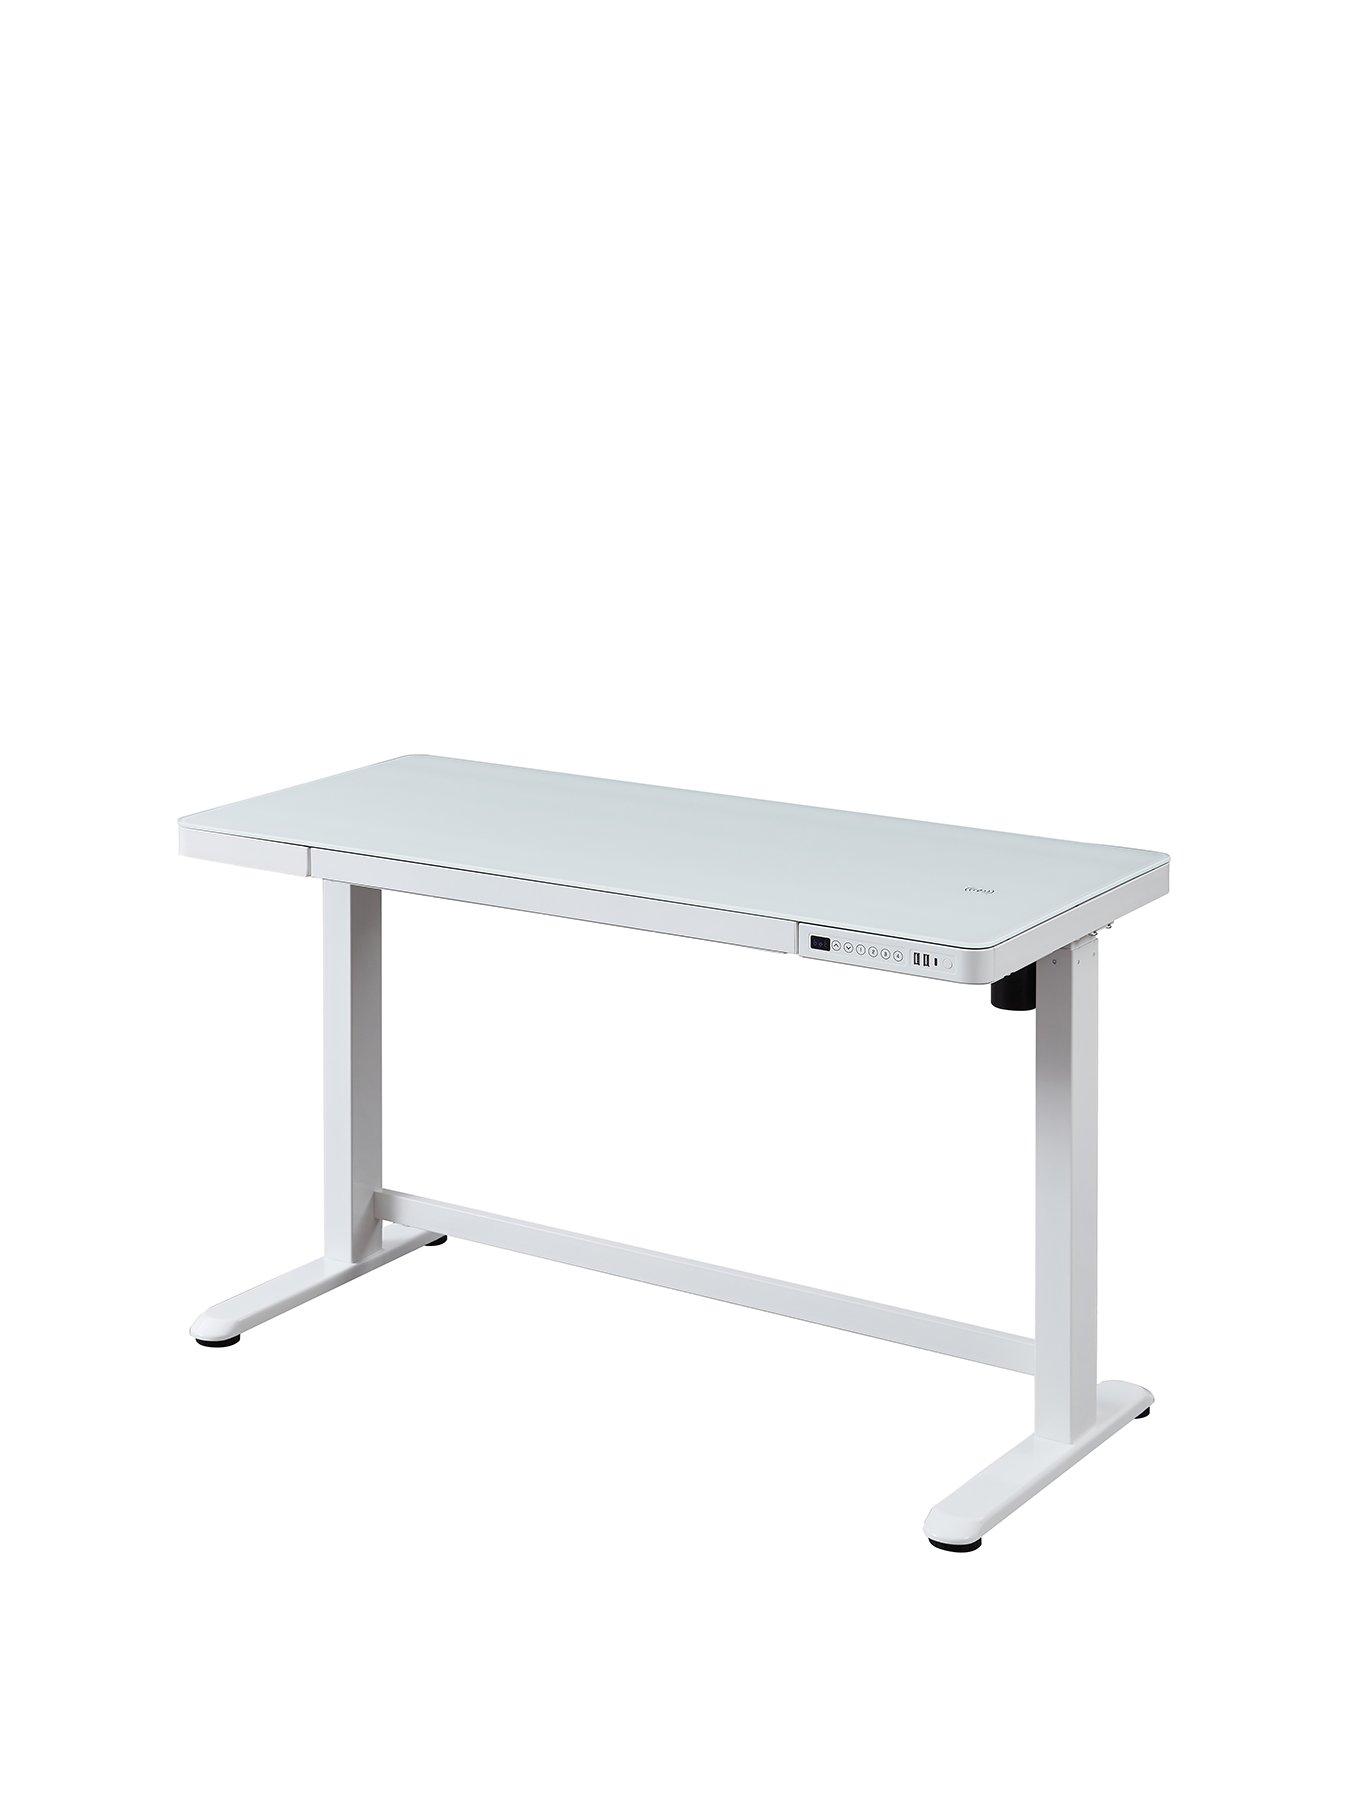 Koble Juno Desk With Wireless Charging, Usb Charging And Electric Height Adjustment - White|